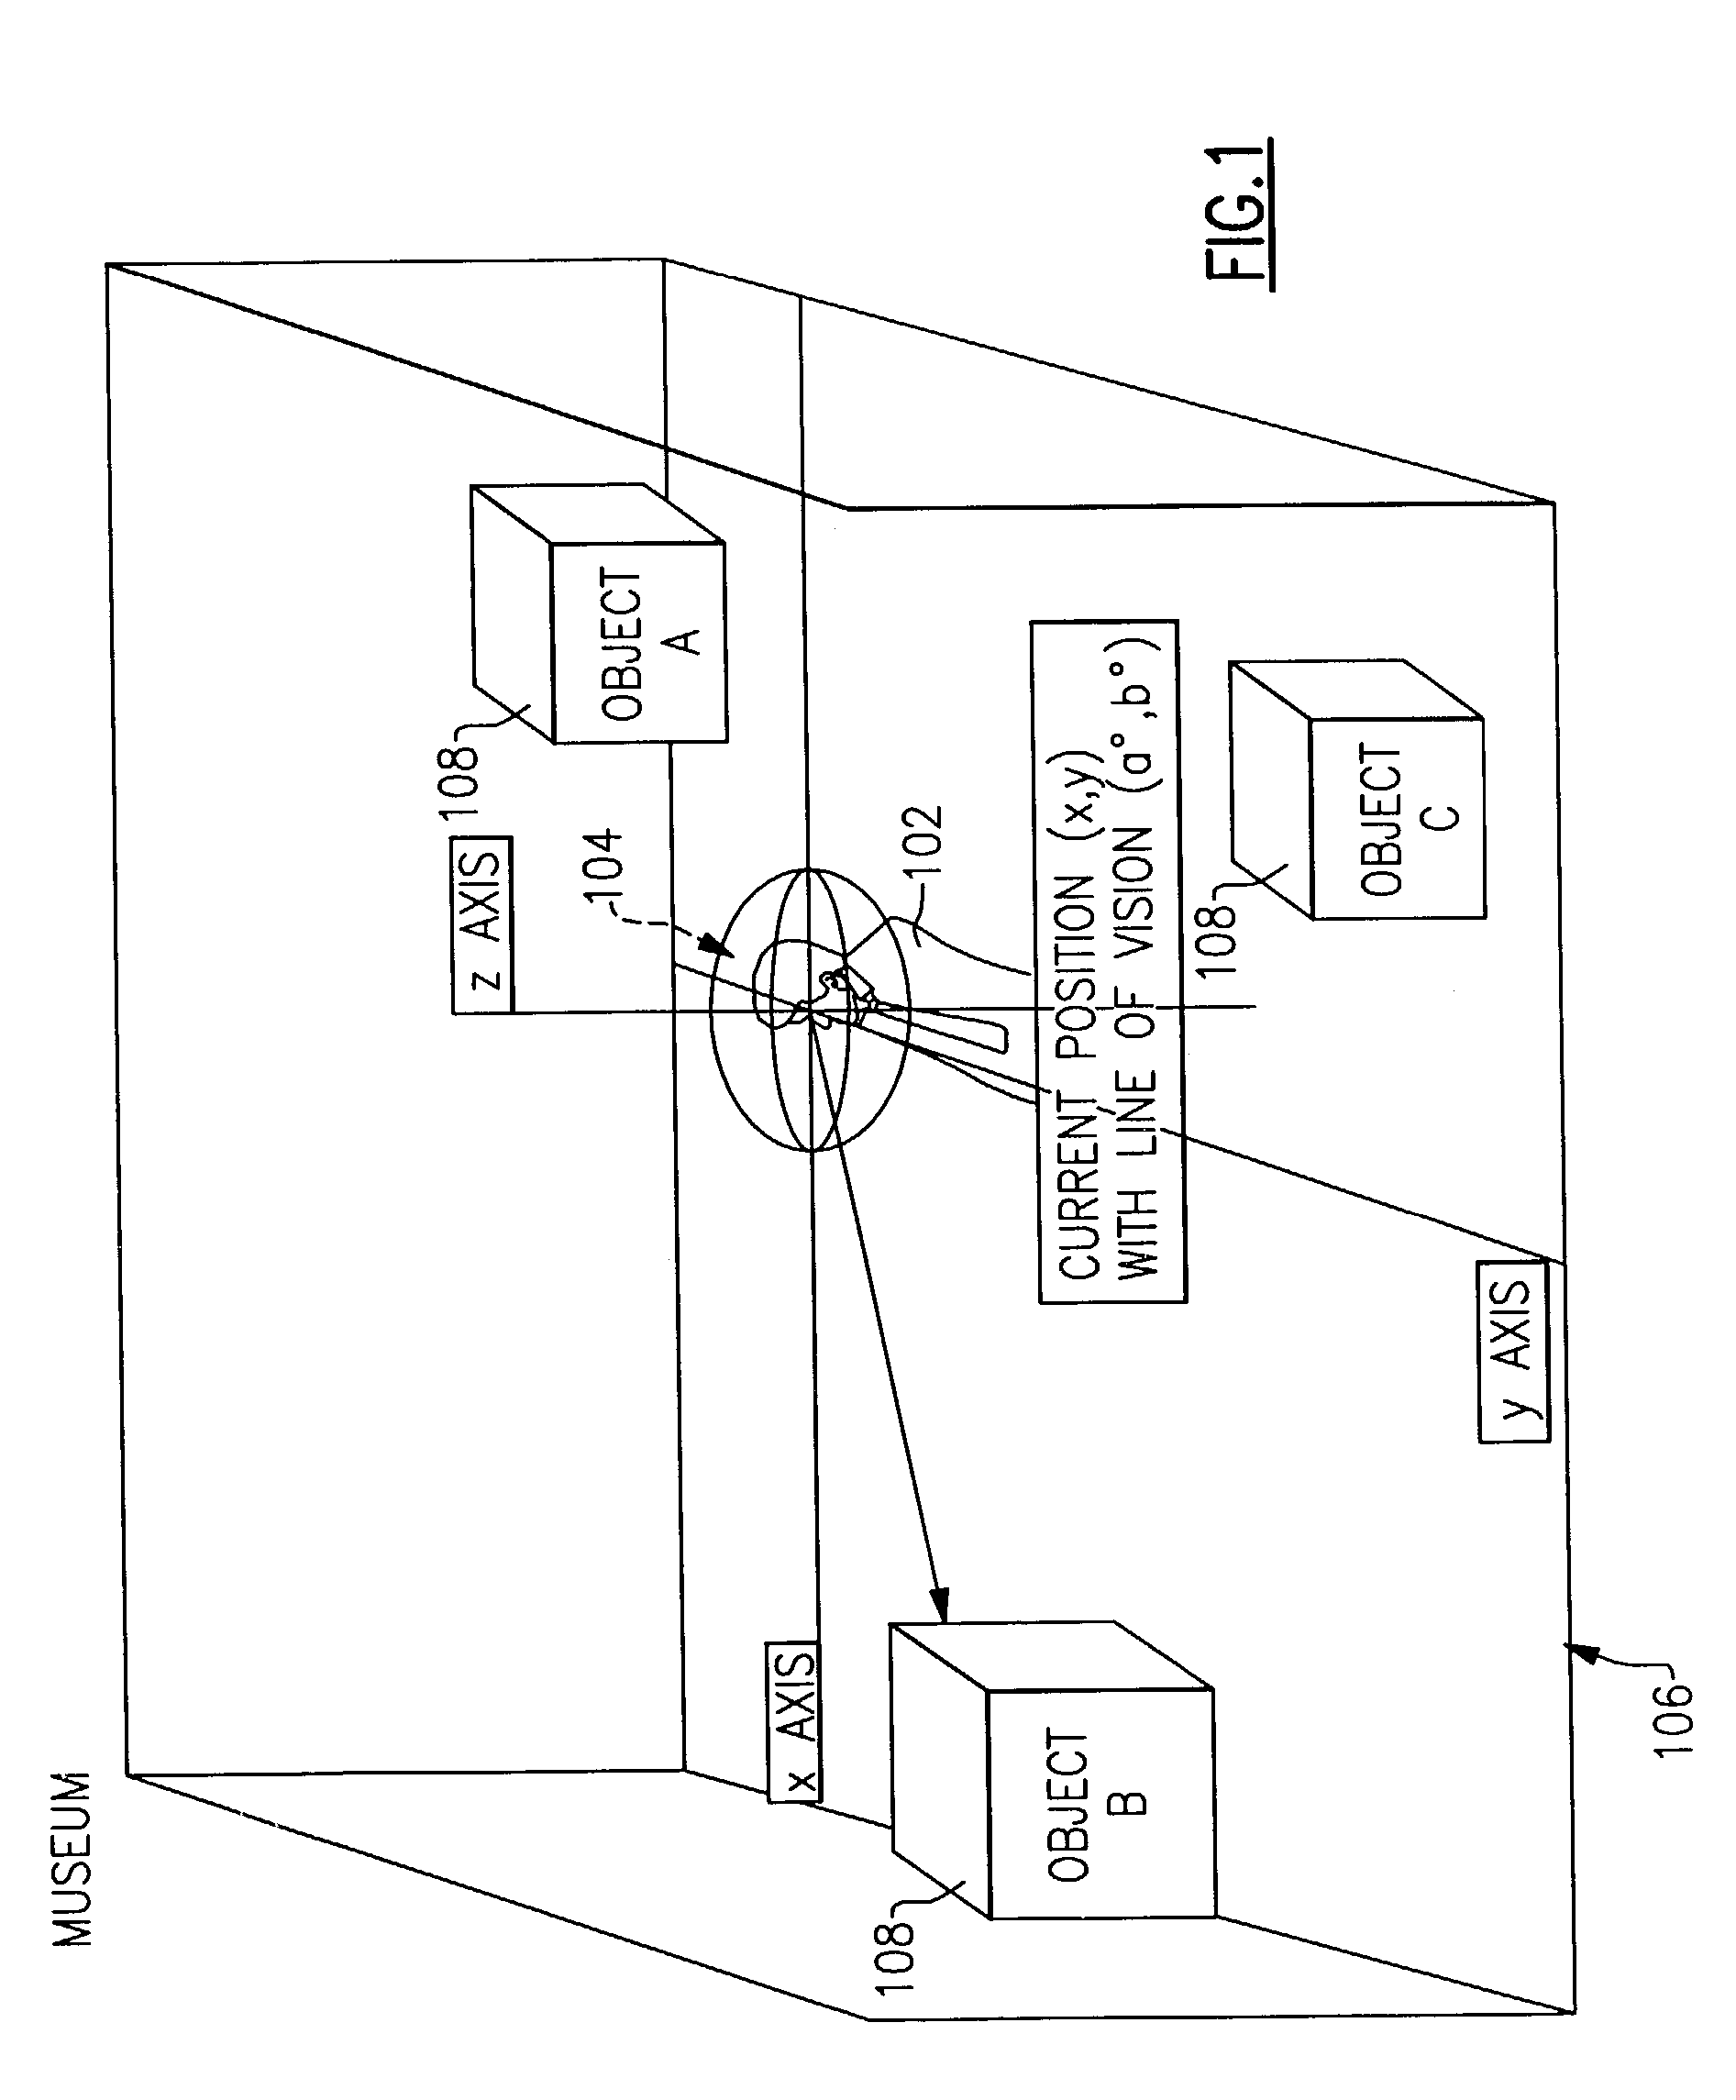 Method and apparatus for retrieving information about an object of interest to an observer